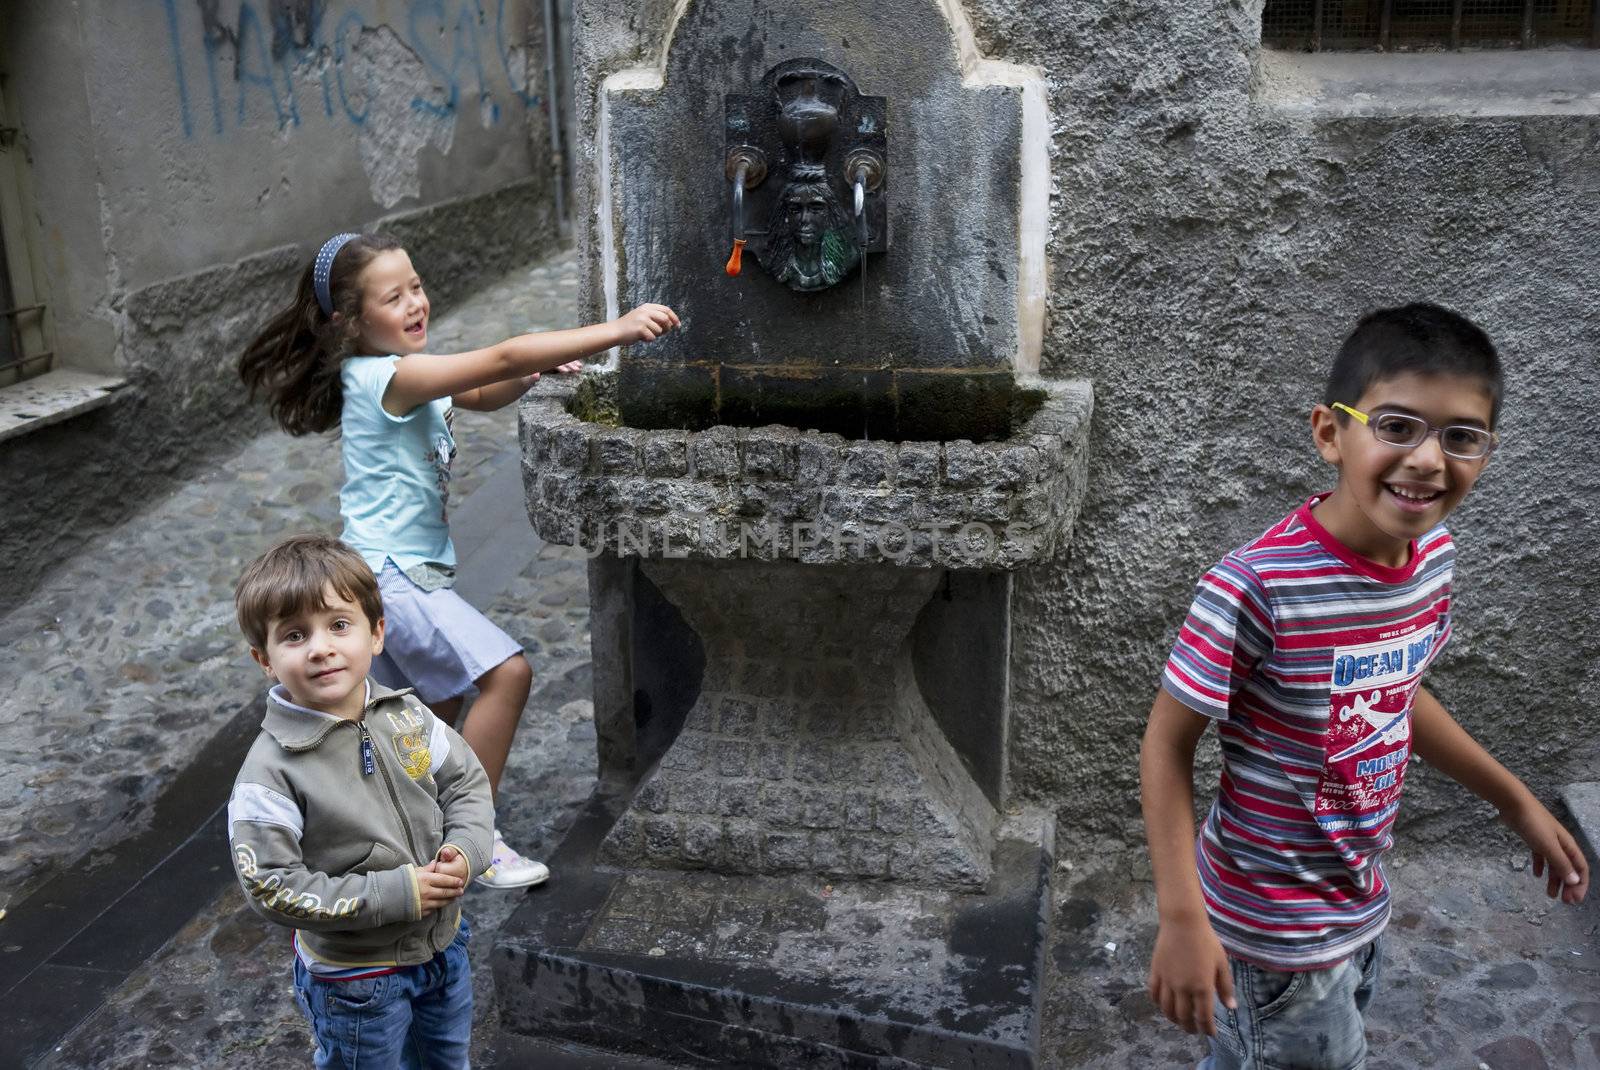 PLAYING WITH WATER, LONGOBUCCO, ITALY, SEPTEMBER 15 - 2011:  Kids in a narrow alley in the mountain village Longobucco, Calabria - Italy. 